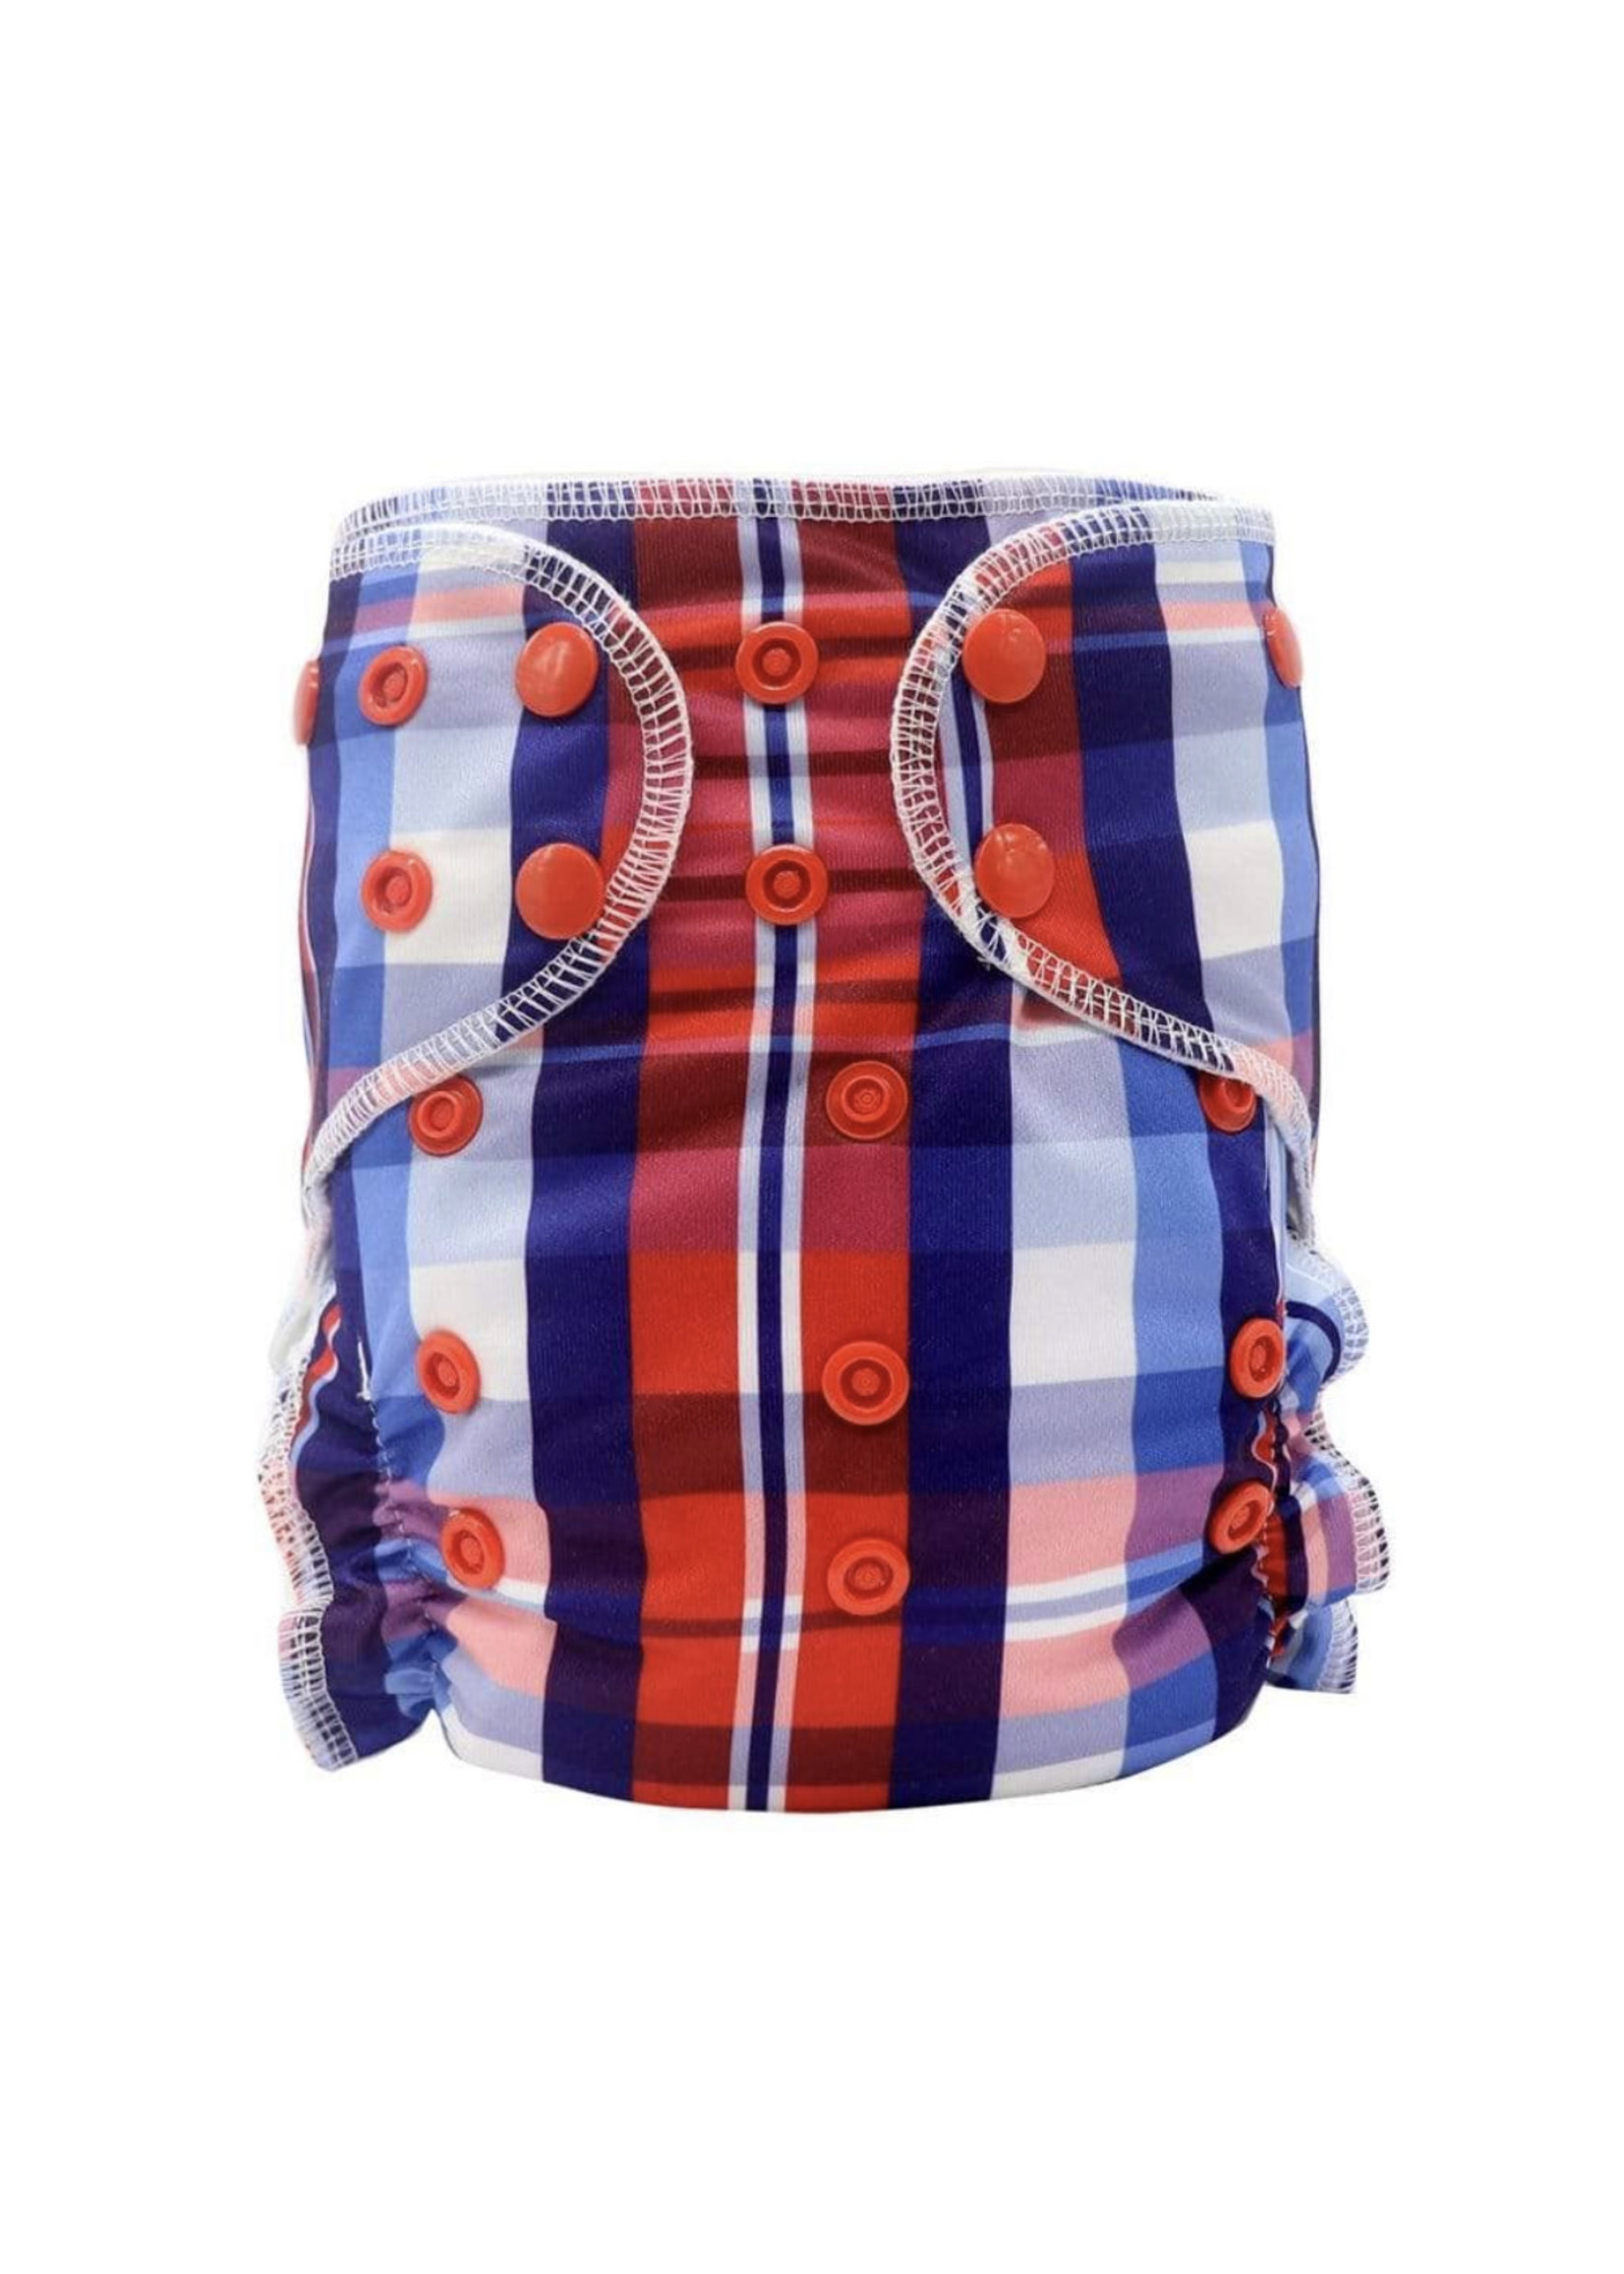 Happy BeeHinds The "Royal" All in One Cloth Diapers